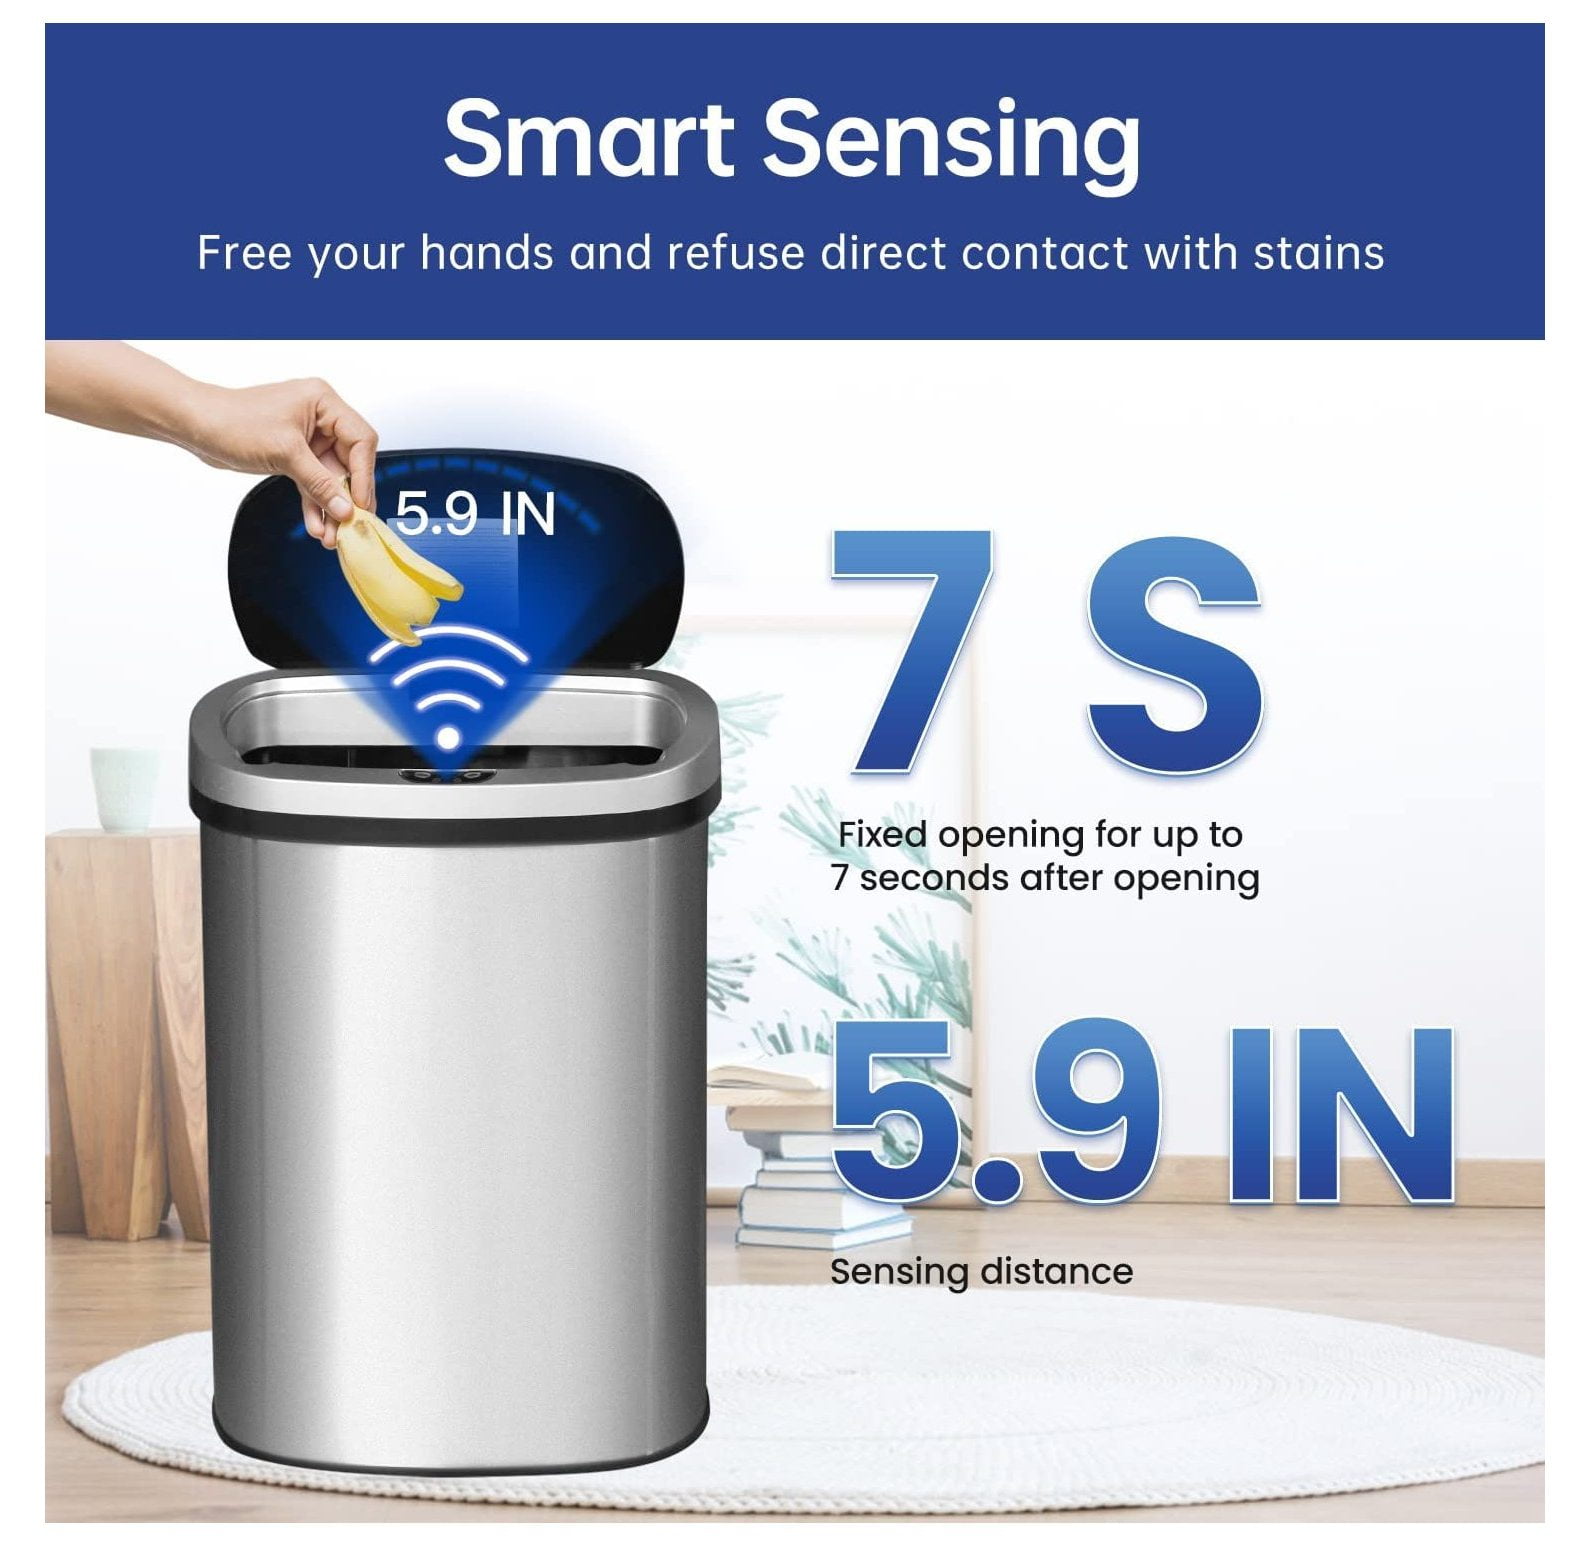 13 Gallon Touch Free Automatic Trash Can High Capacity Plastic Garbage Can Trash Bin with Lid for Kitchen Living Room Office Bathroom, 50L